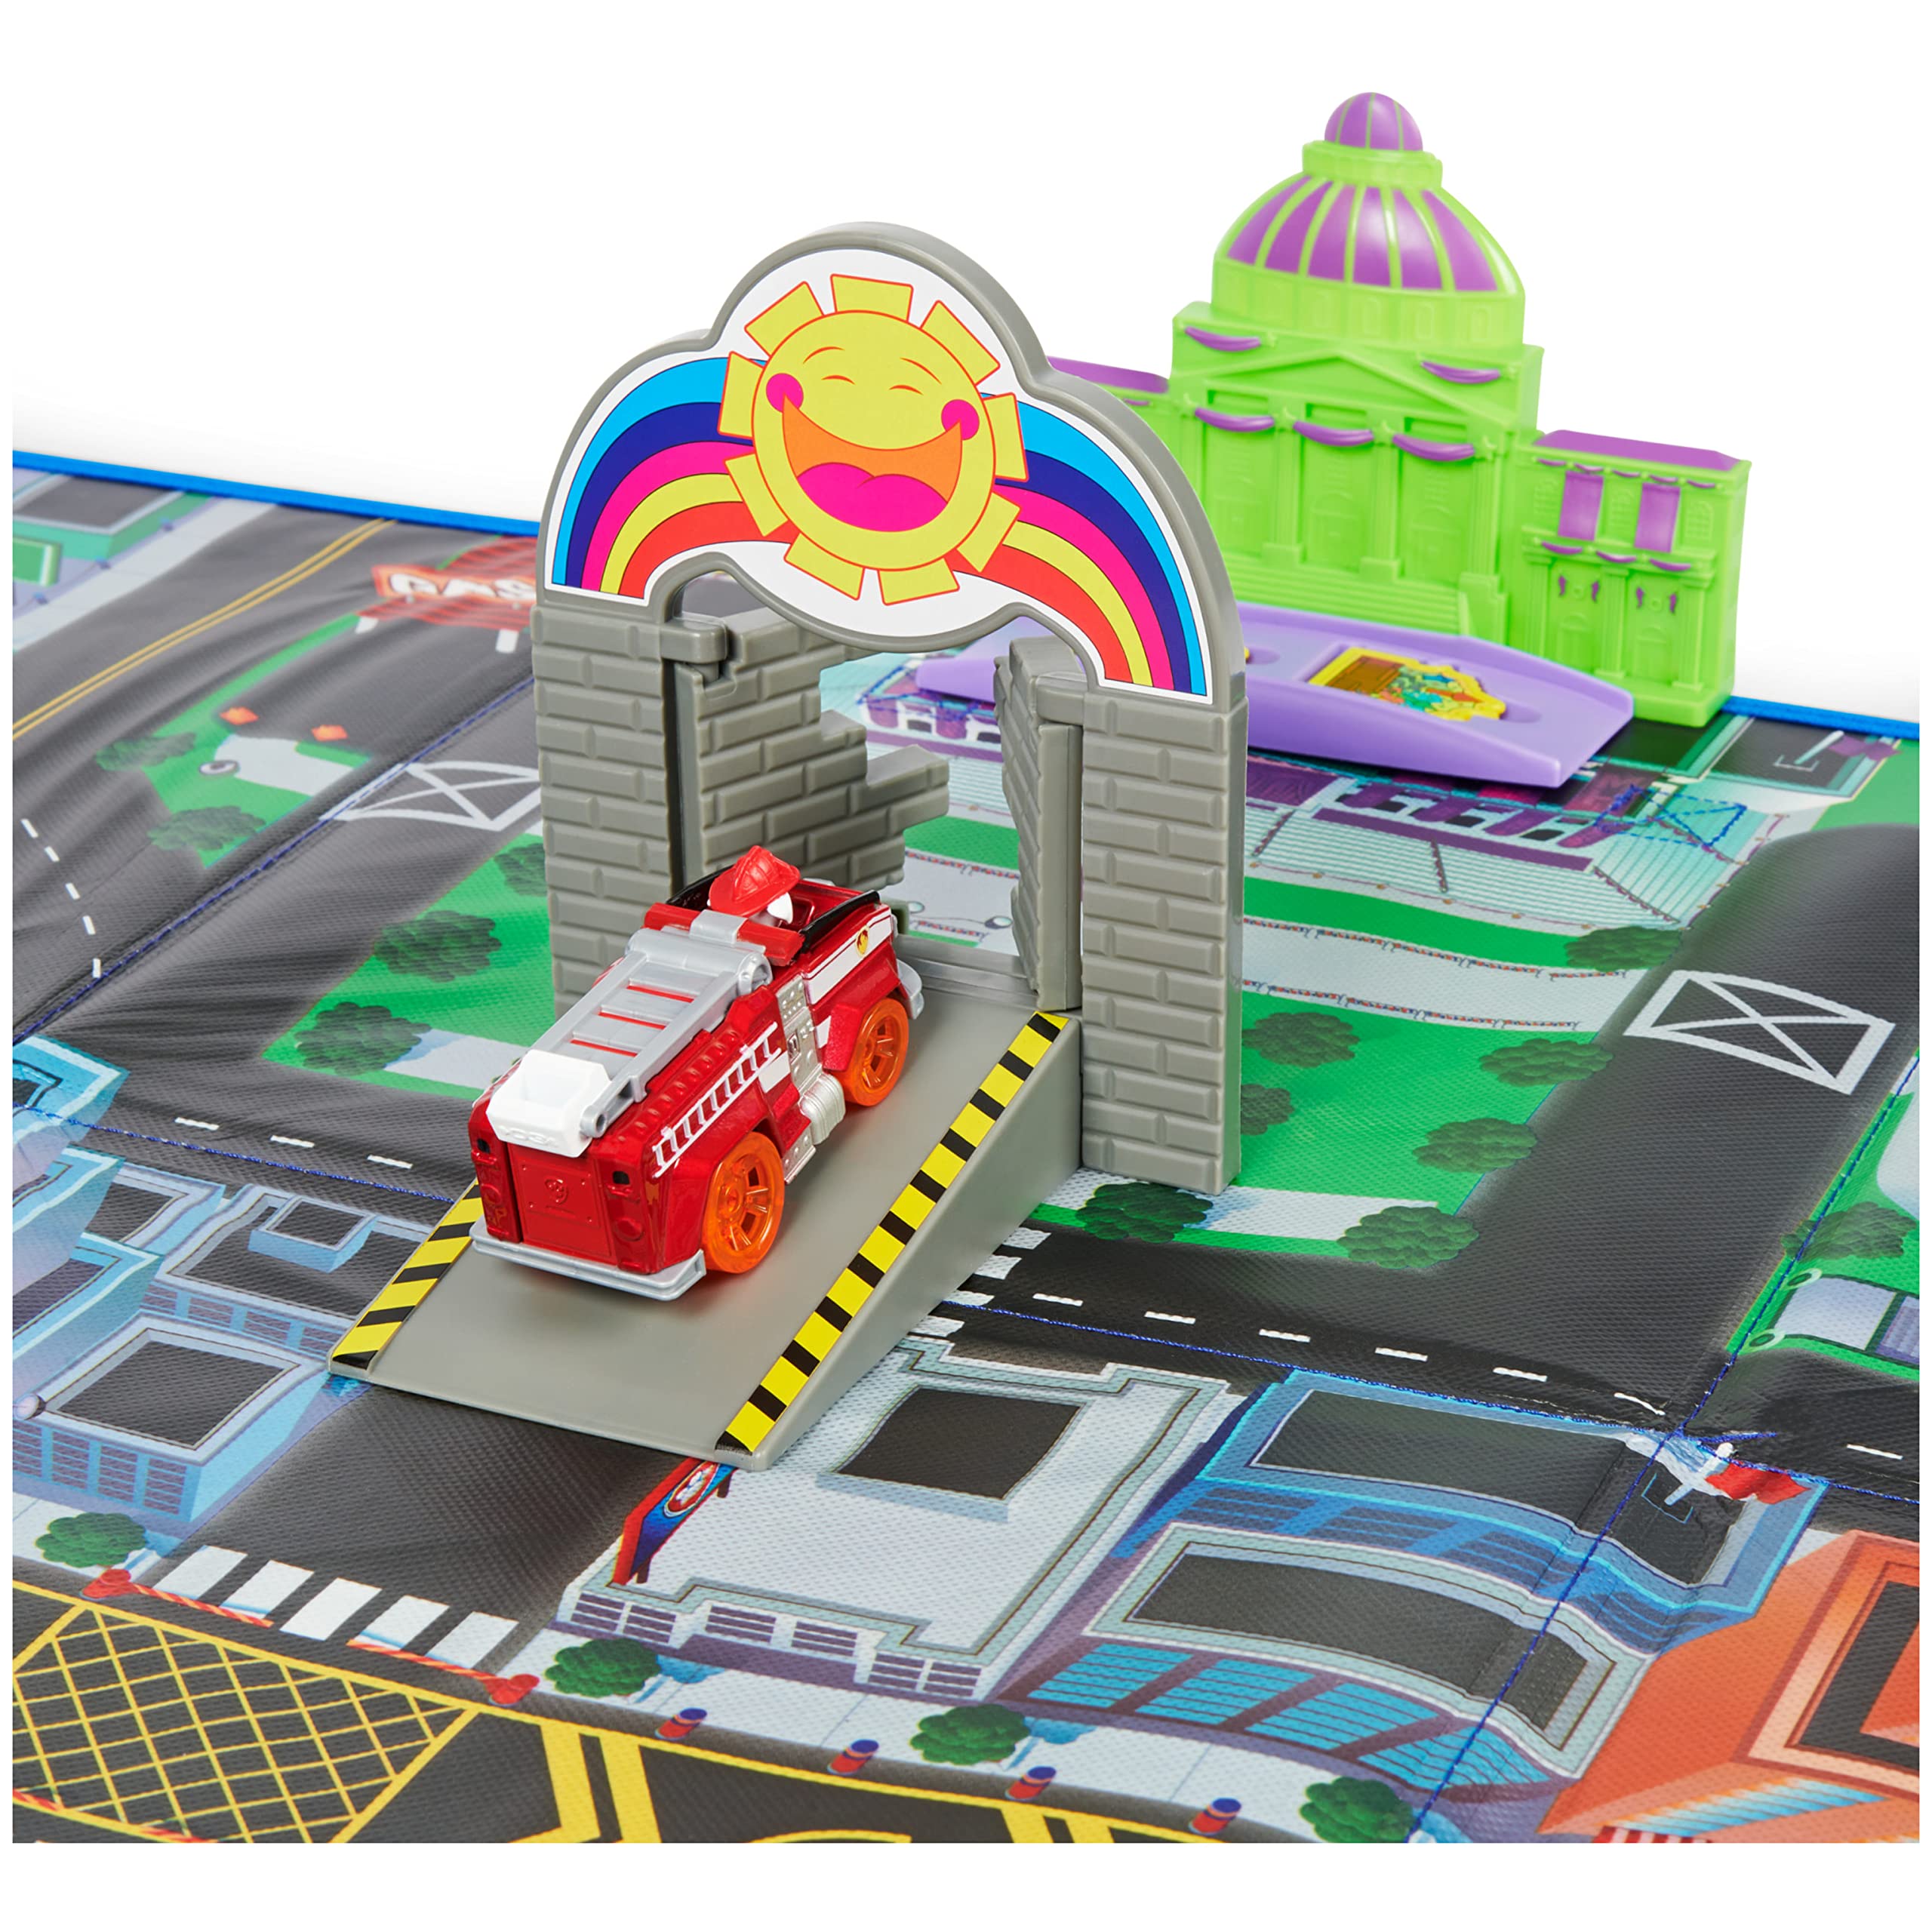 Paw Patrol, True Metal Adventure City Movie Play Mat Set with 2 Exclusive Toy Cars (Amazon Exclusive), 1:55 Scale, Kids Toys for Ages 3 and Up